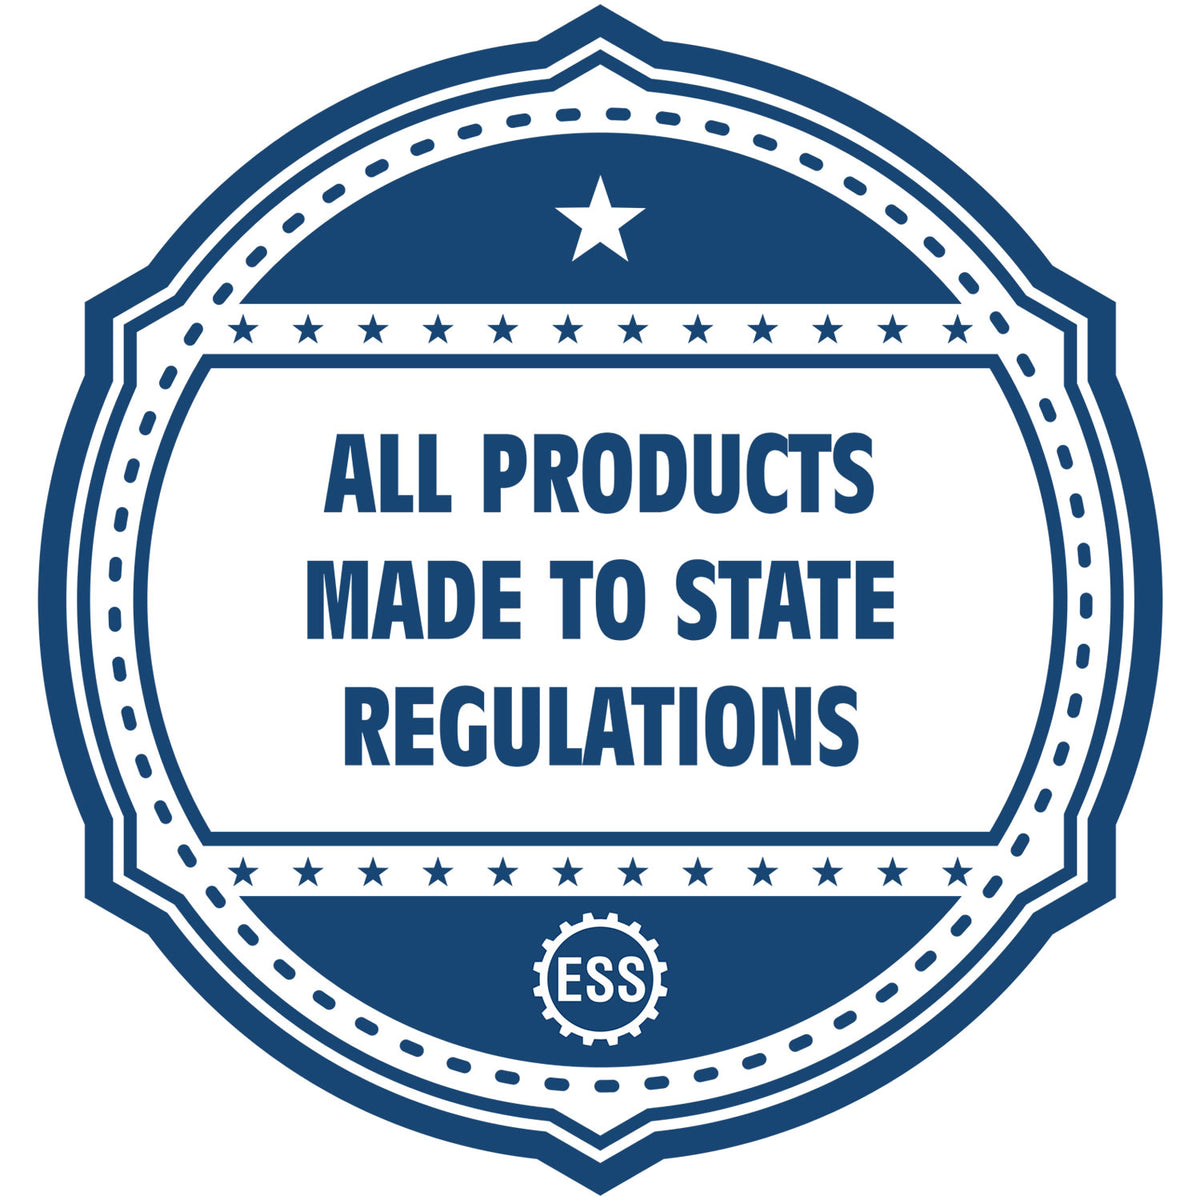 A blue icon or badge for the State of Missouri Extended Long Reach Geologist Seal showing that this product is made in compliance with state regulations.